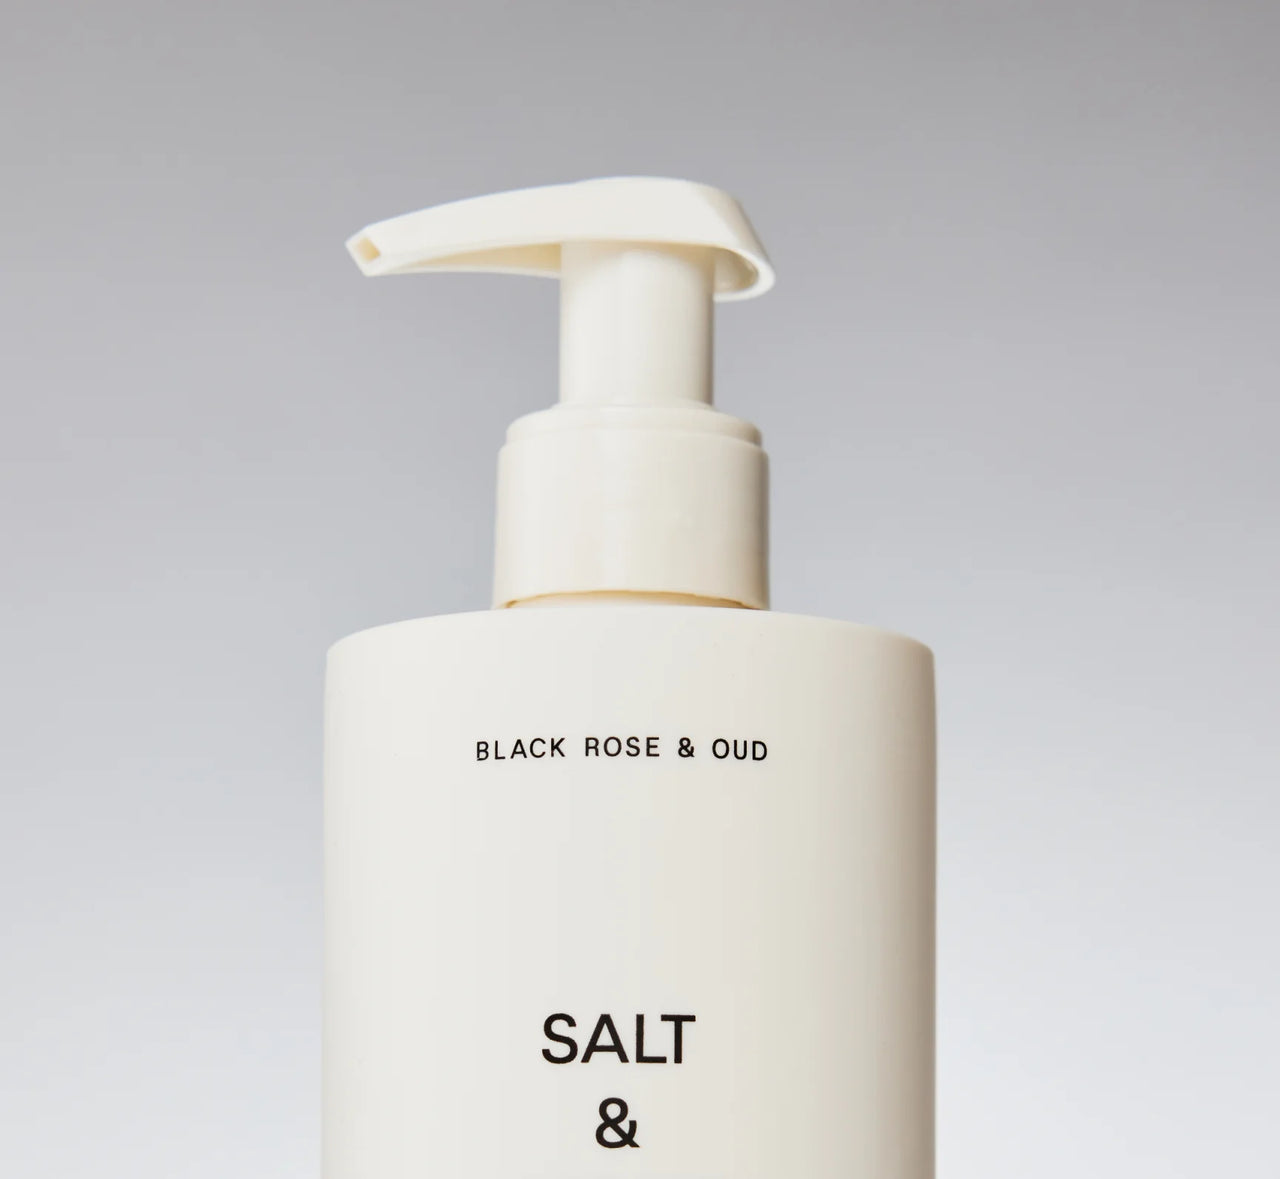 SALT AND STONE BODY LOTION- BLACK ROSE & OUD